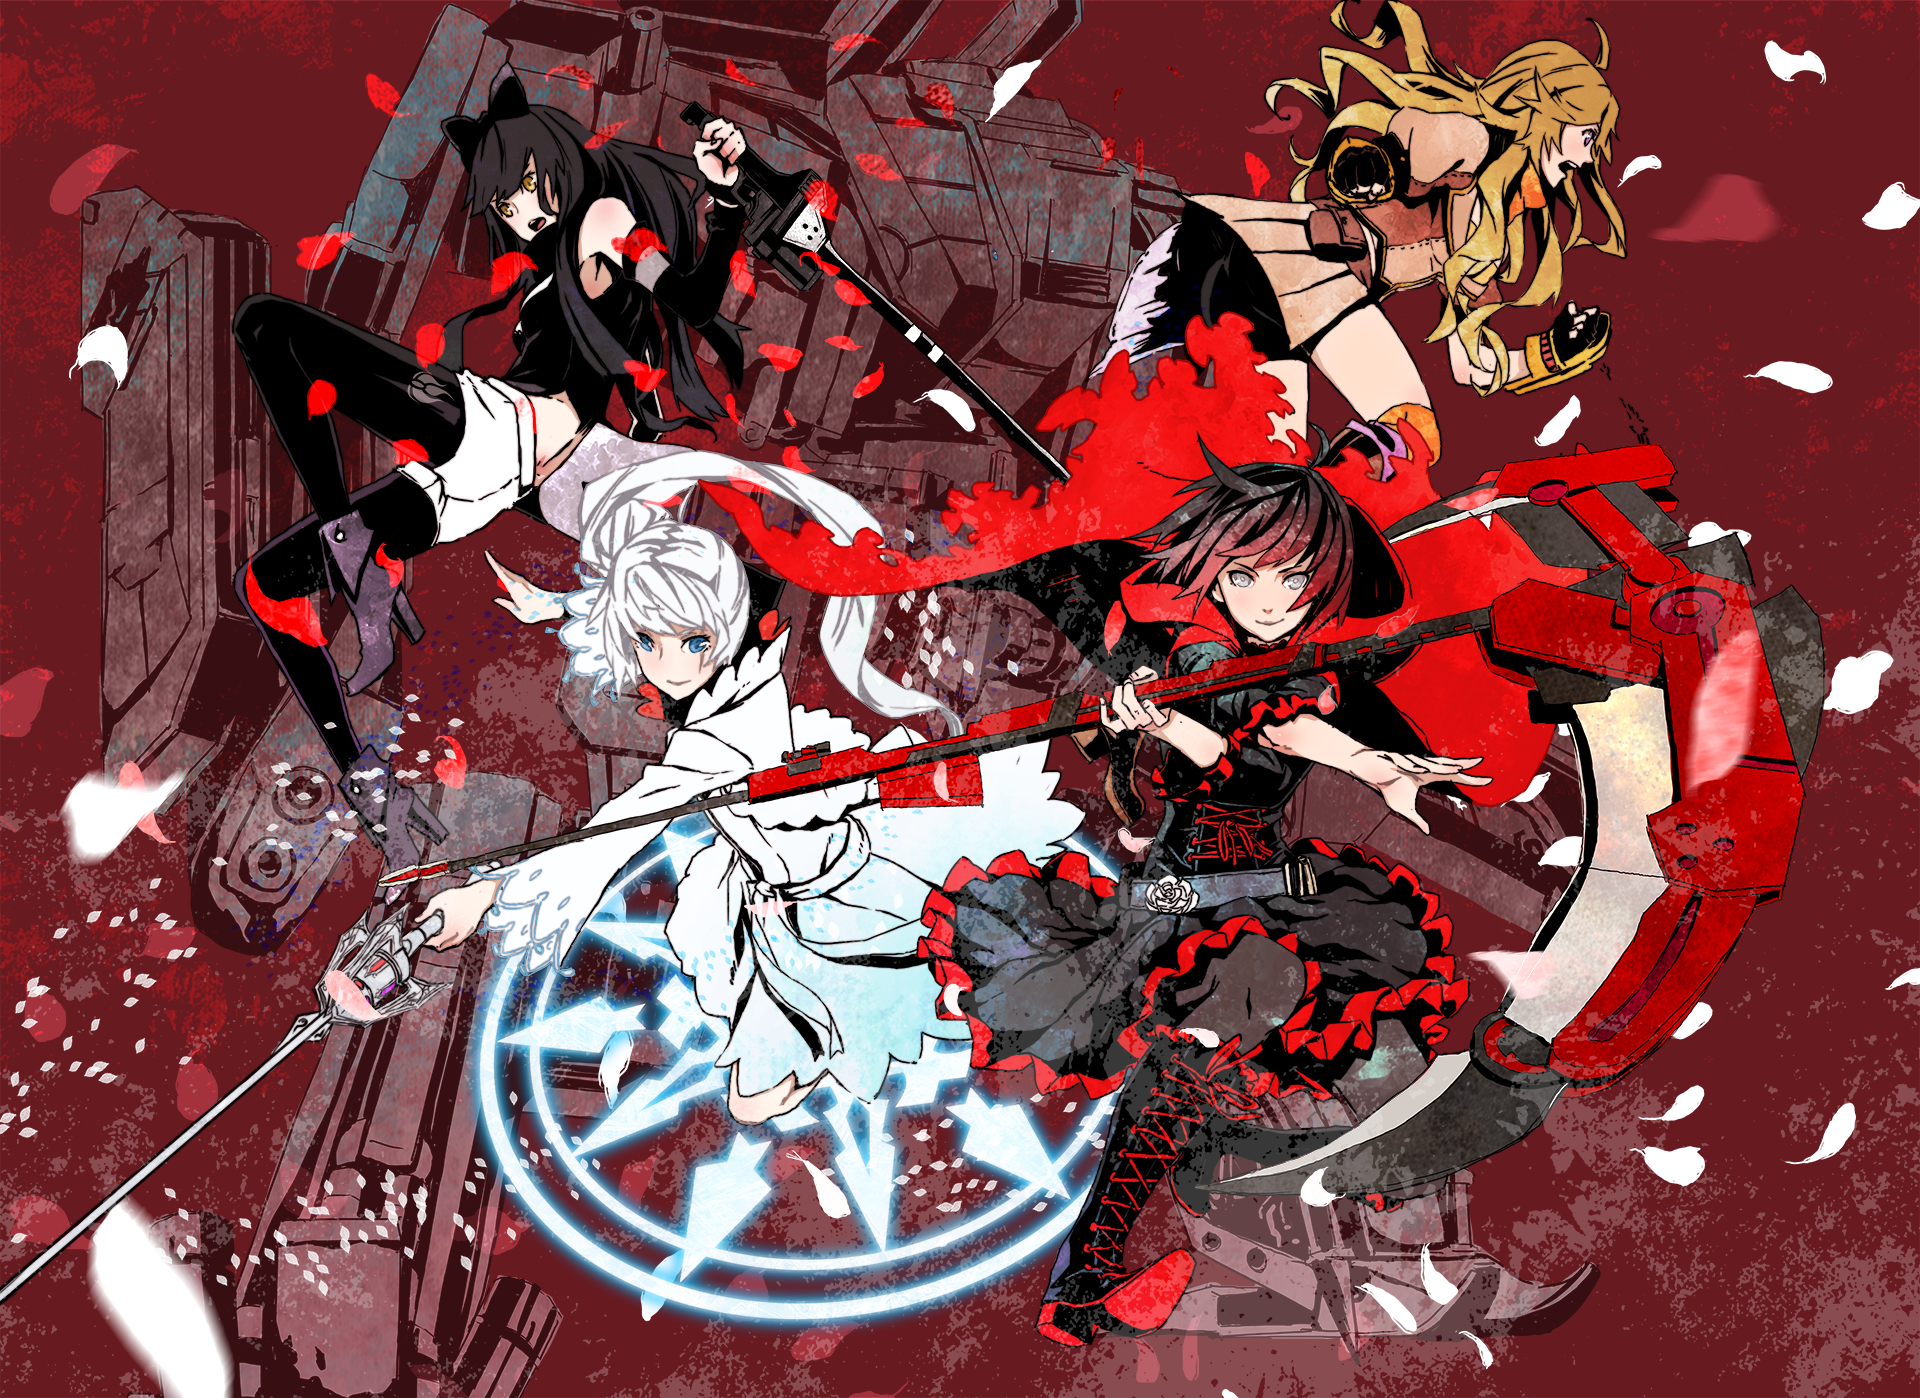 Rwby Backgrounds